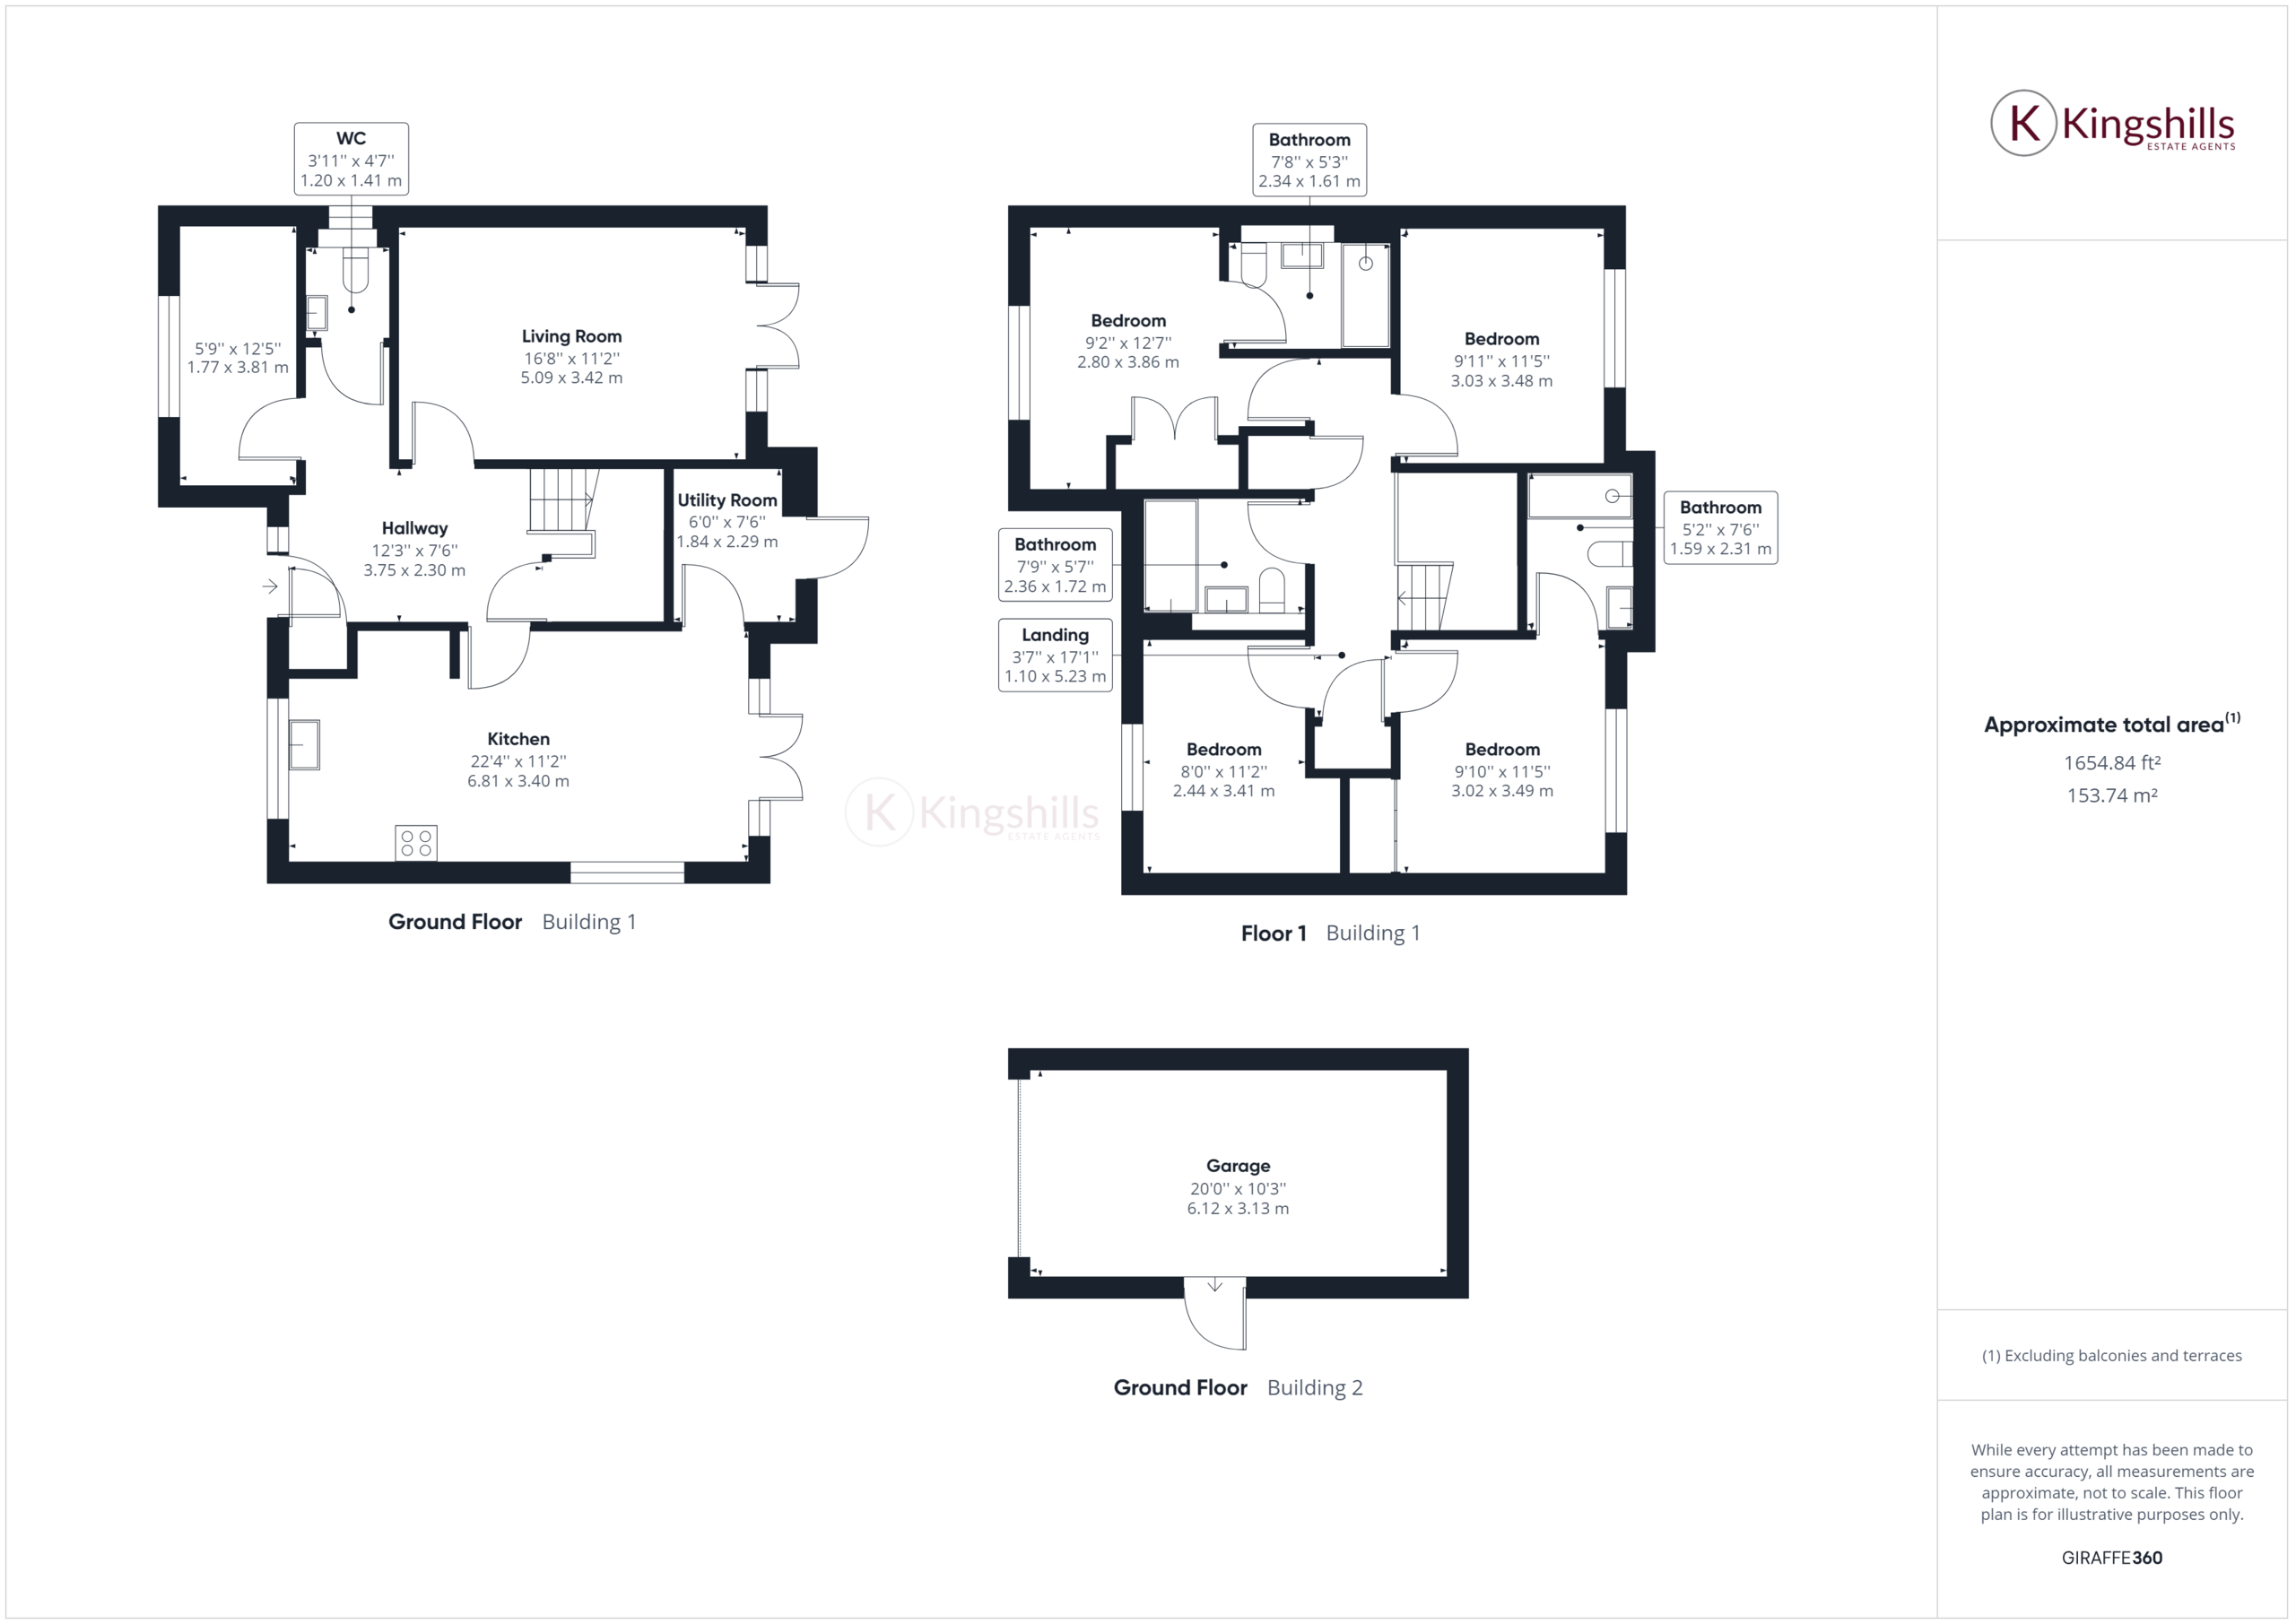 4 bed detached house to rent in Heatherdene Road, High Wycombe - Property floorplan